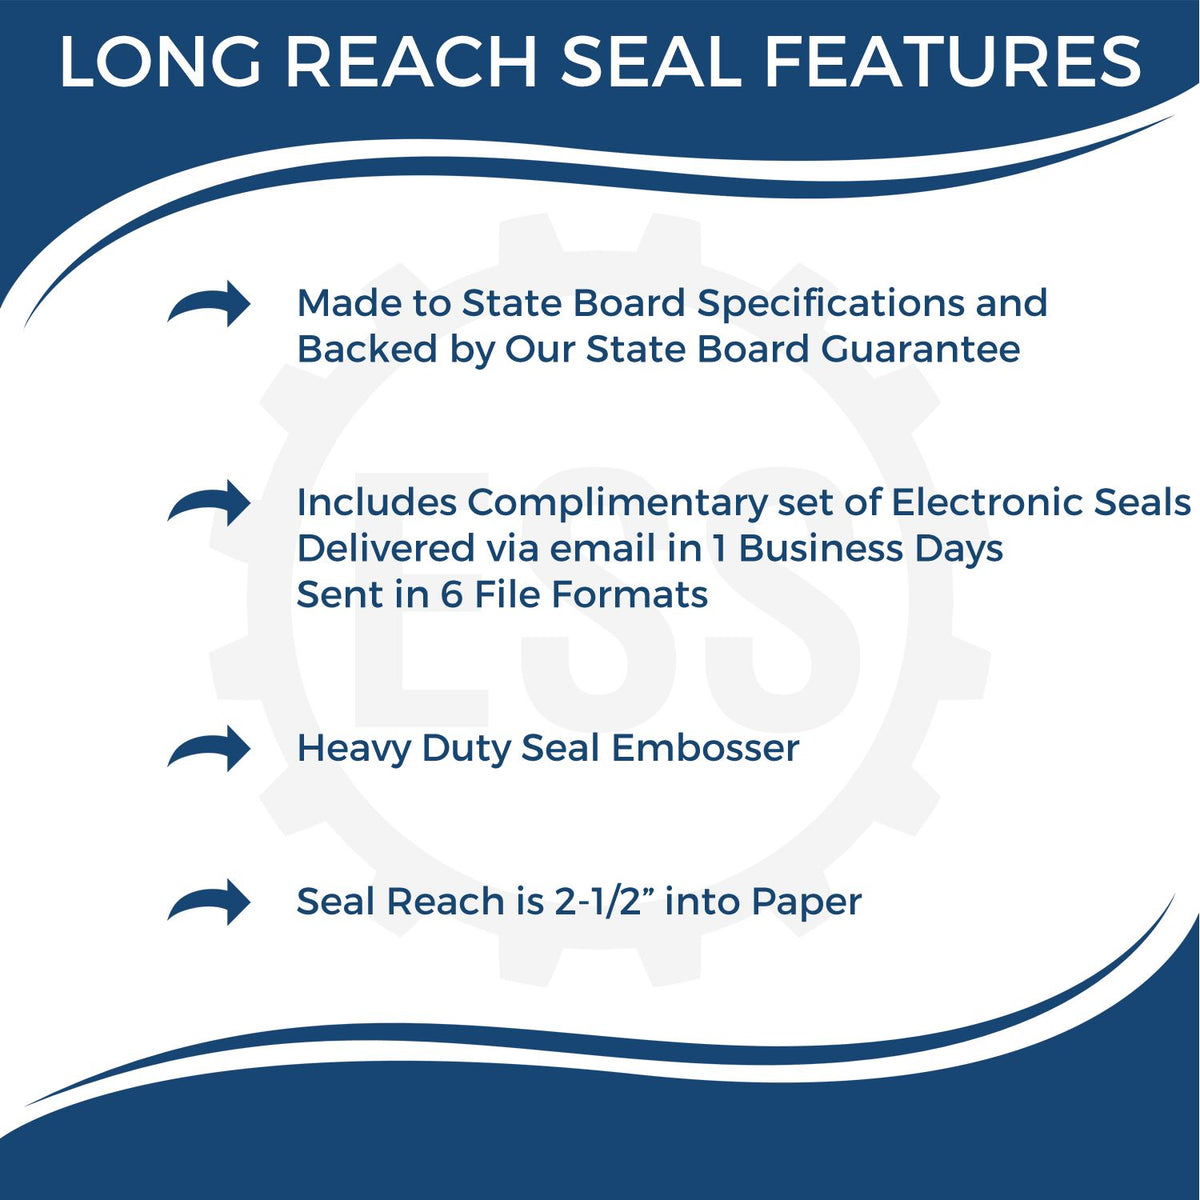 A picture of an infographic highlighting the selling points for the Long Reach Massachusetts Geology Seal